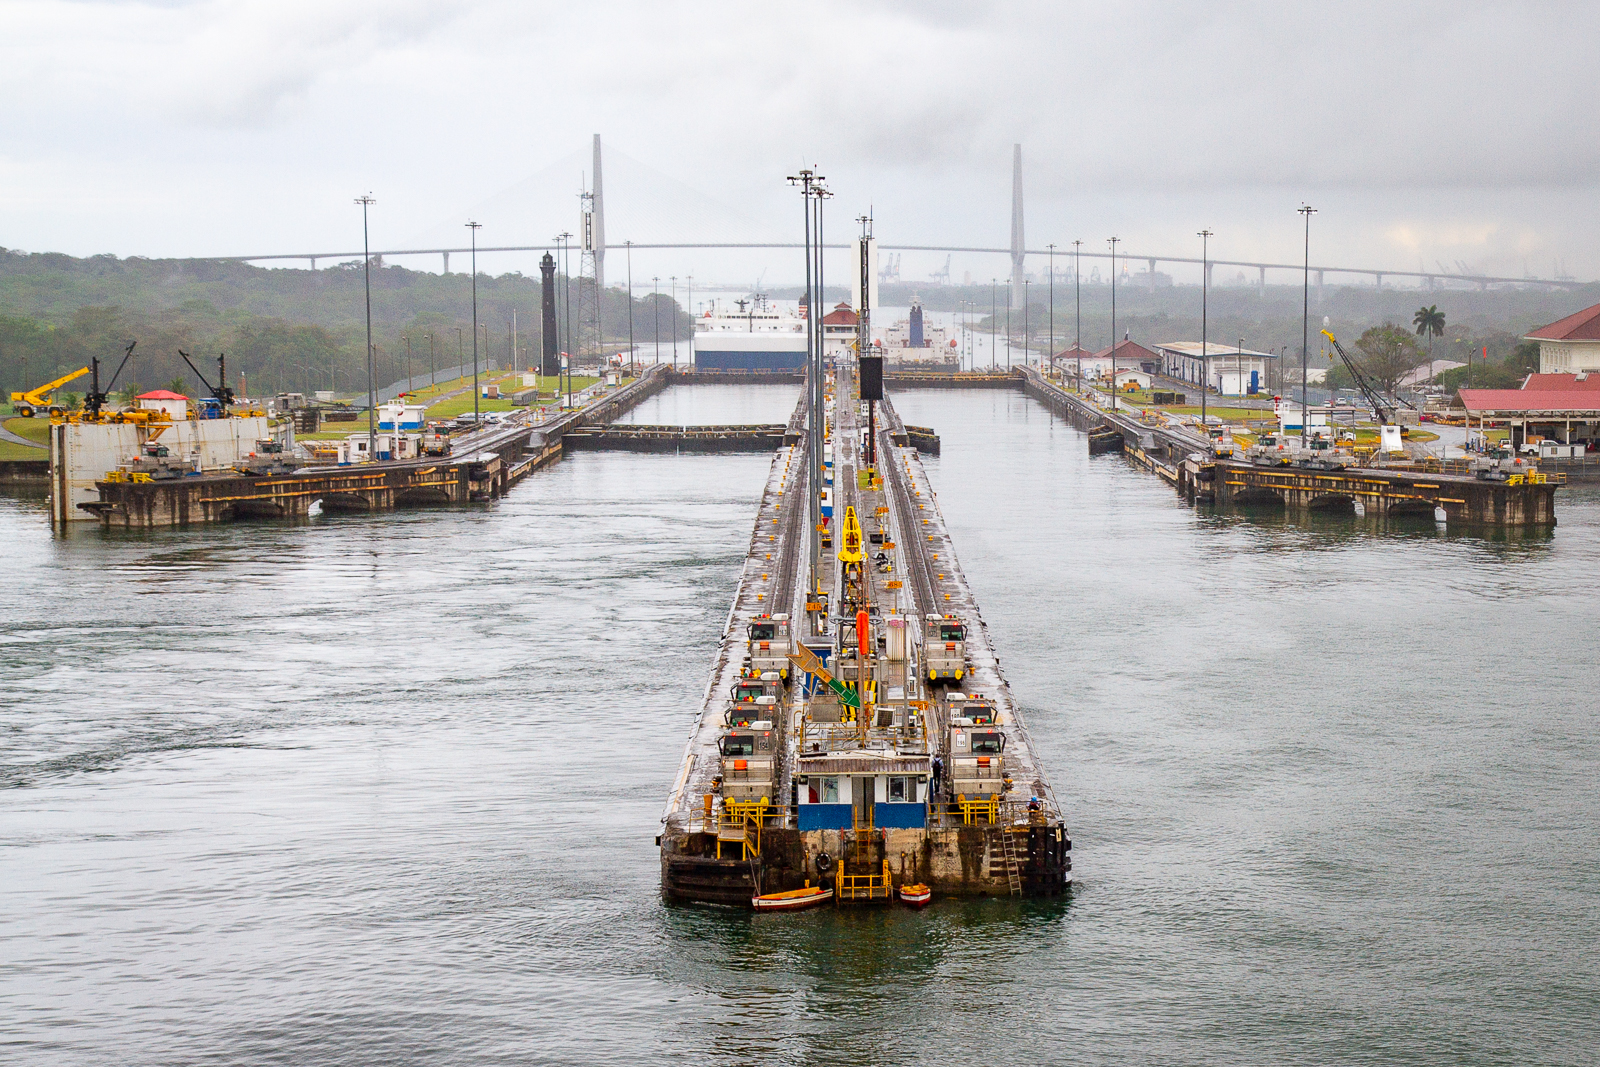 A photo of the lock system on the Panama Canal. The Canal is split by a long pier with two seperate locks used for transferring ships up the canal.